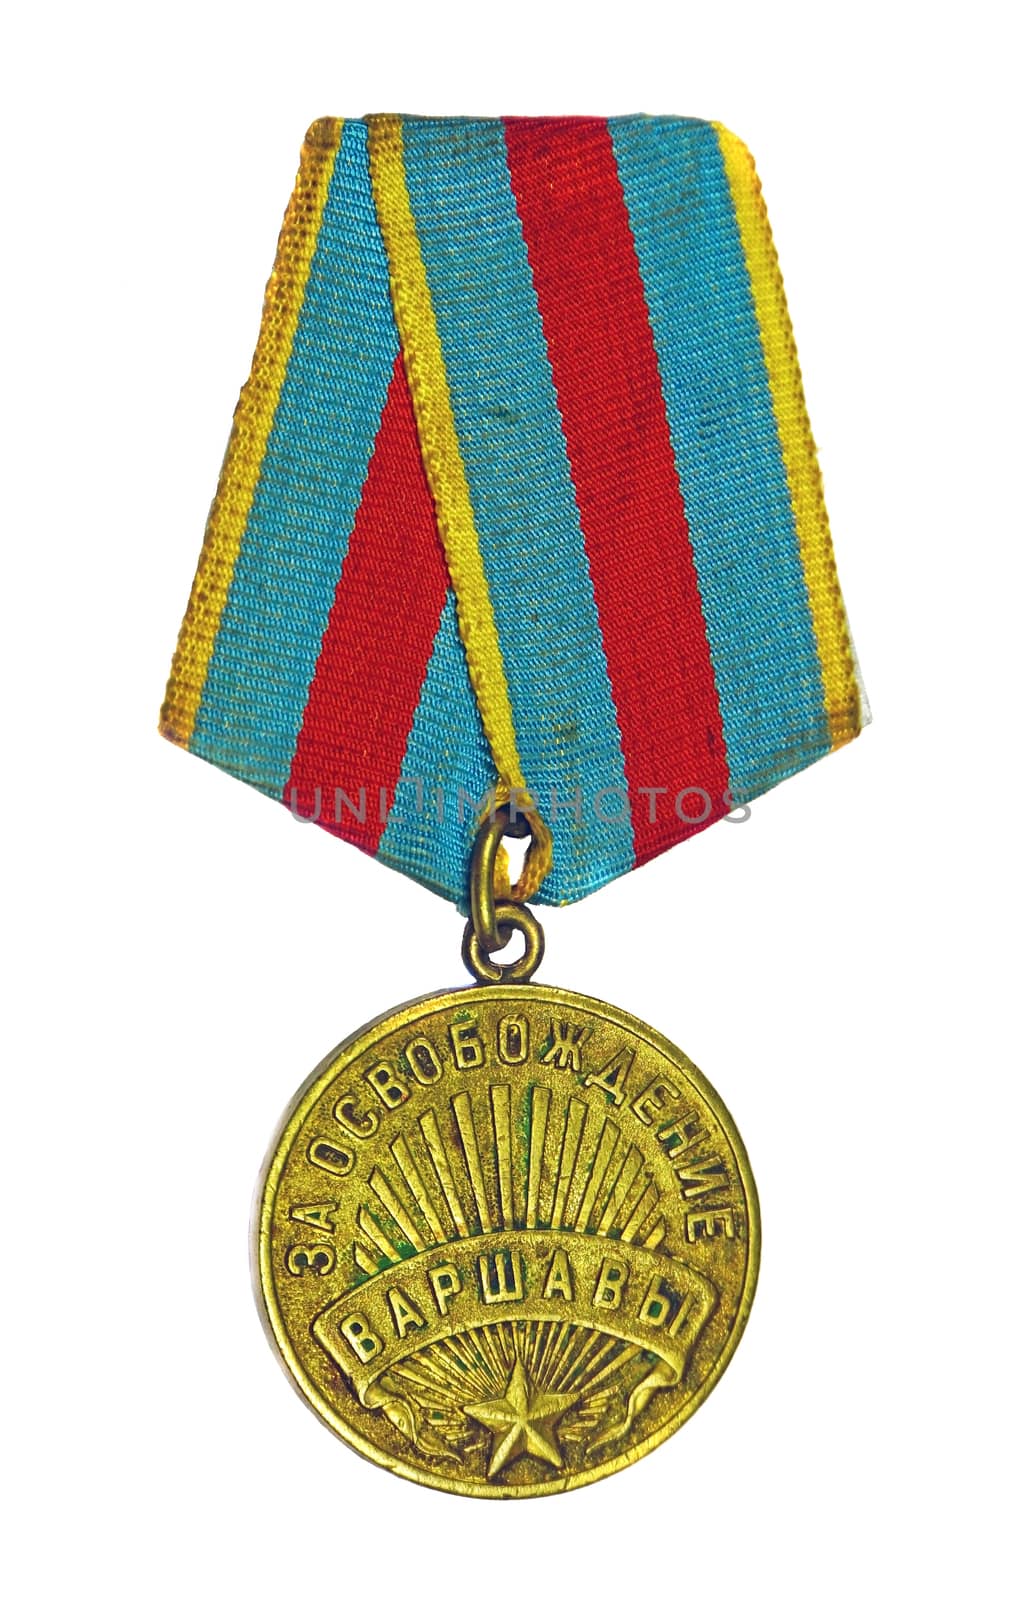 Medal "For the Liberation of Warsaw" on a white background